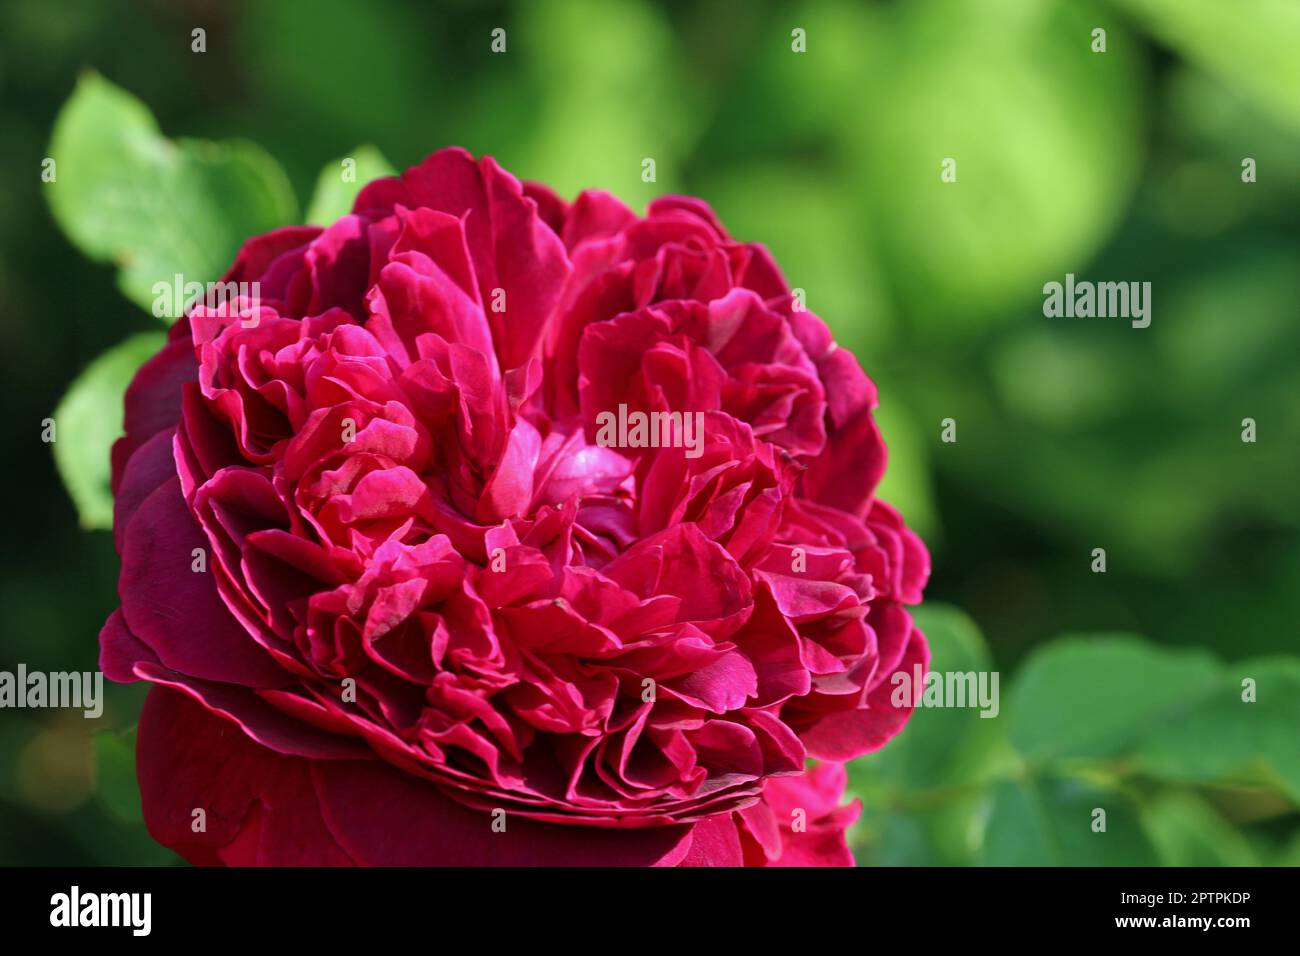 Red rose, Rosa variety William Shakespeare 2000, flower in close up with a background of blurred leaves. Stock Photo